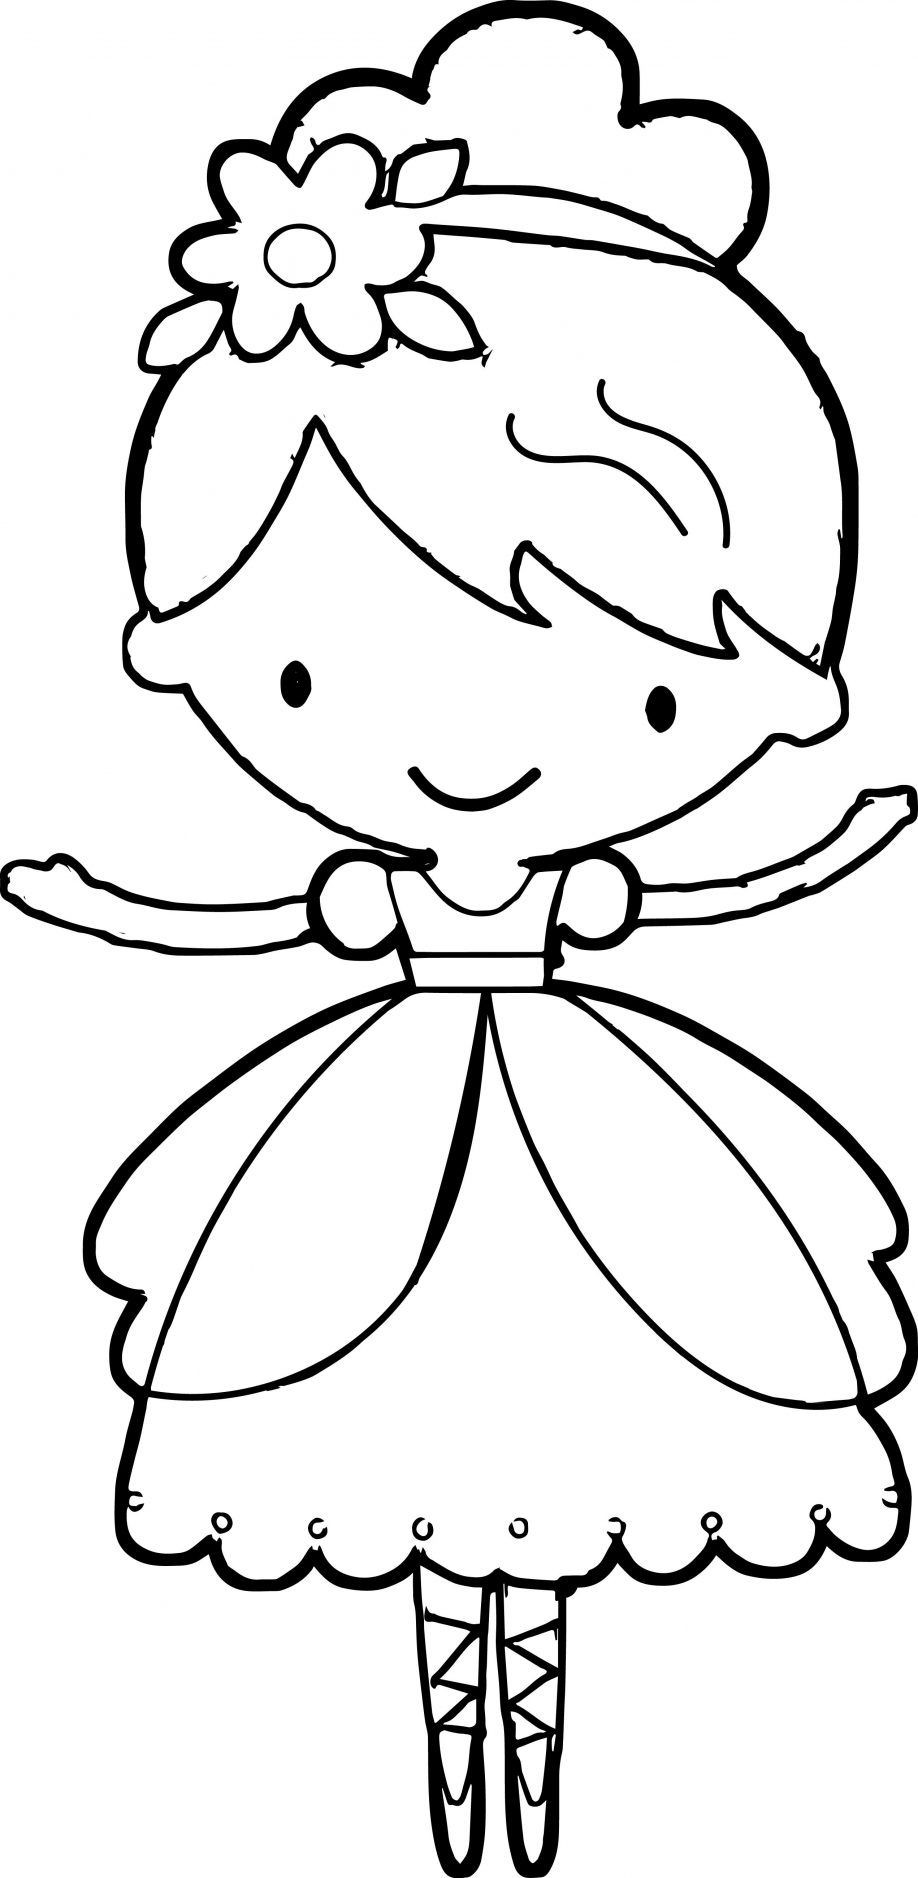 Ballerina Coloring Pages For Kids
 Ballerina Coloring Pages For Kids at GetDrawings